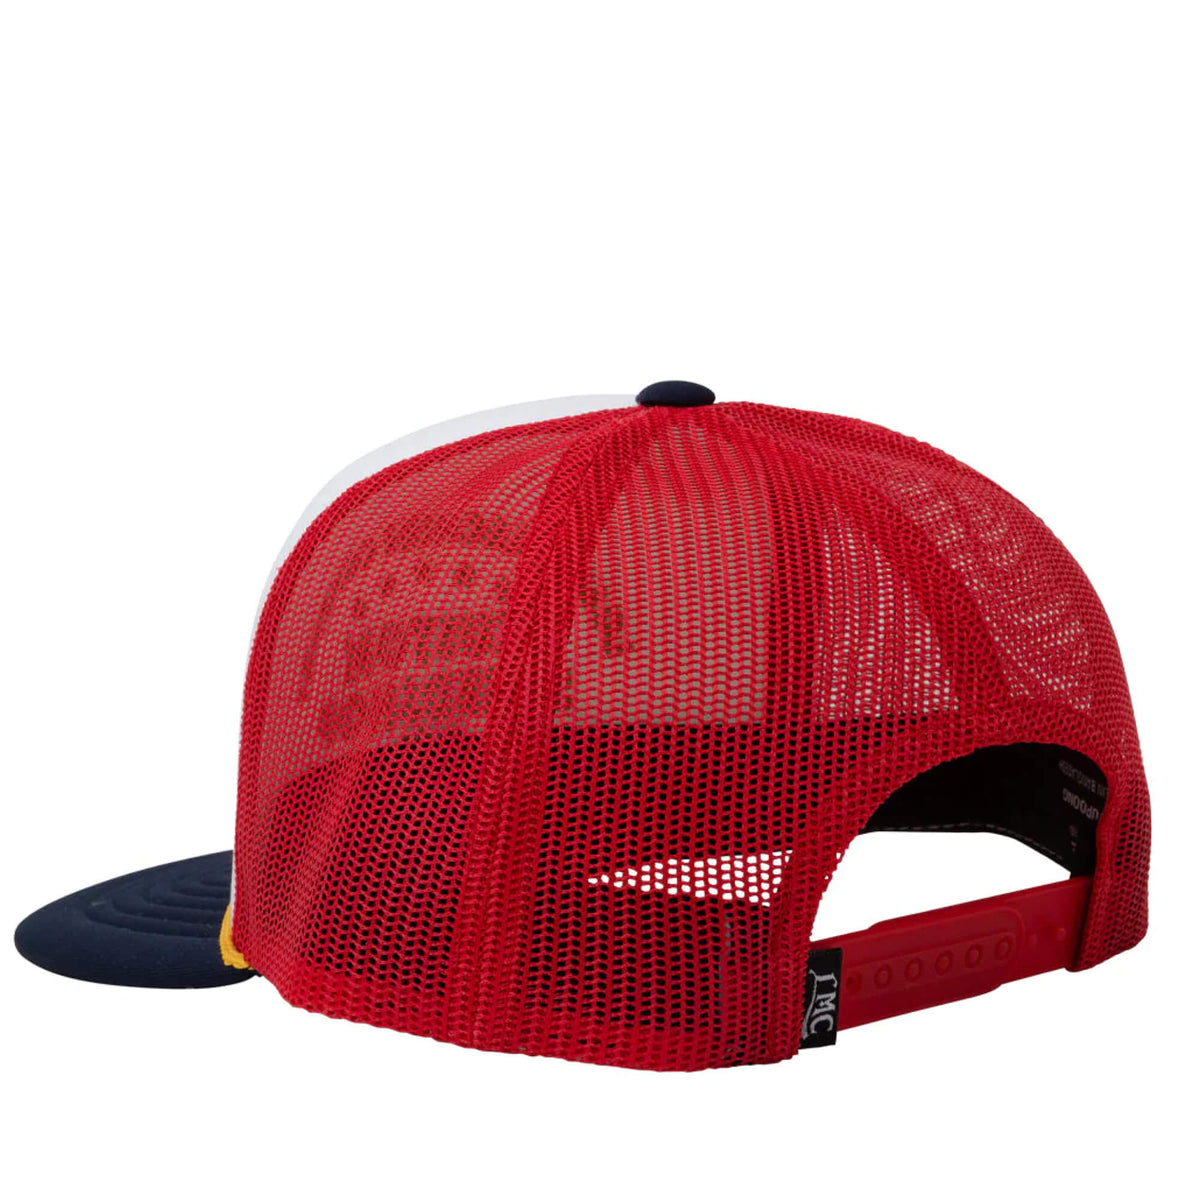 Loser Machine Clothing Double Down Snapback Trucker Cap White Red Navy